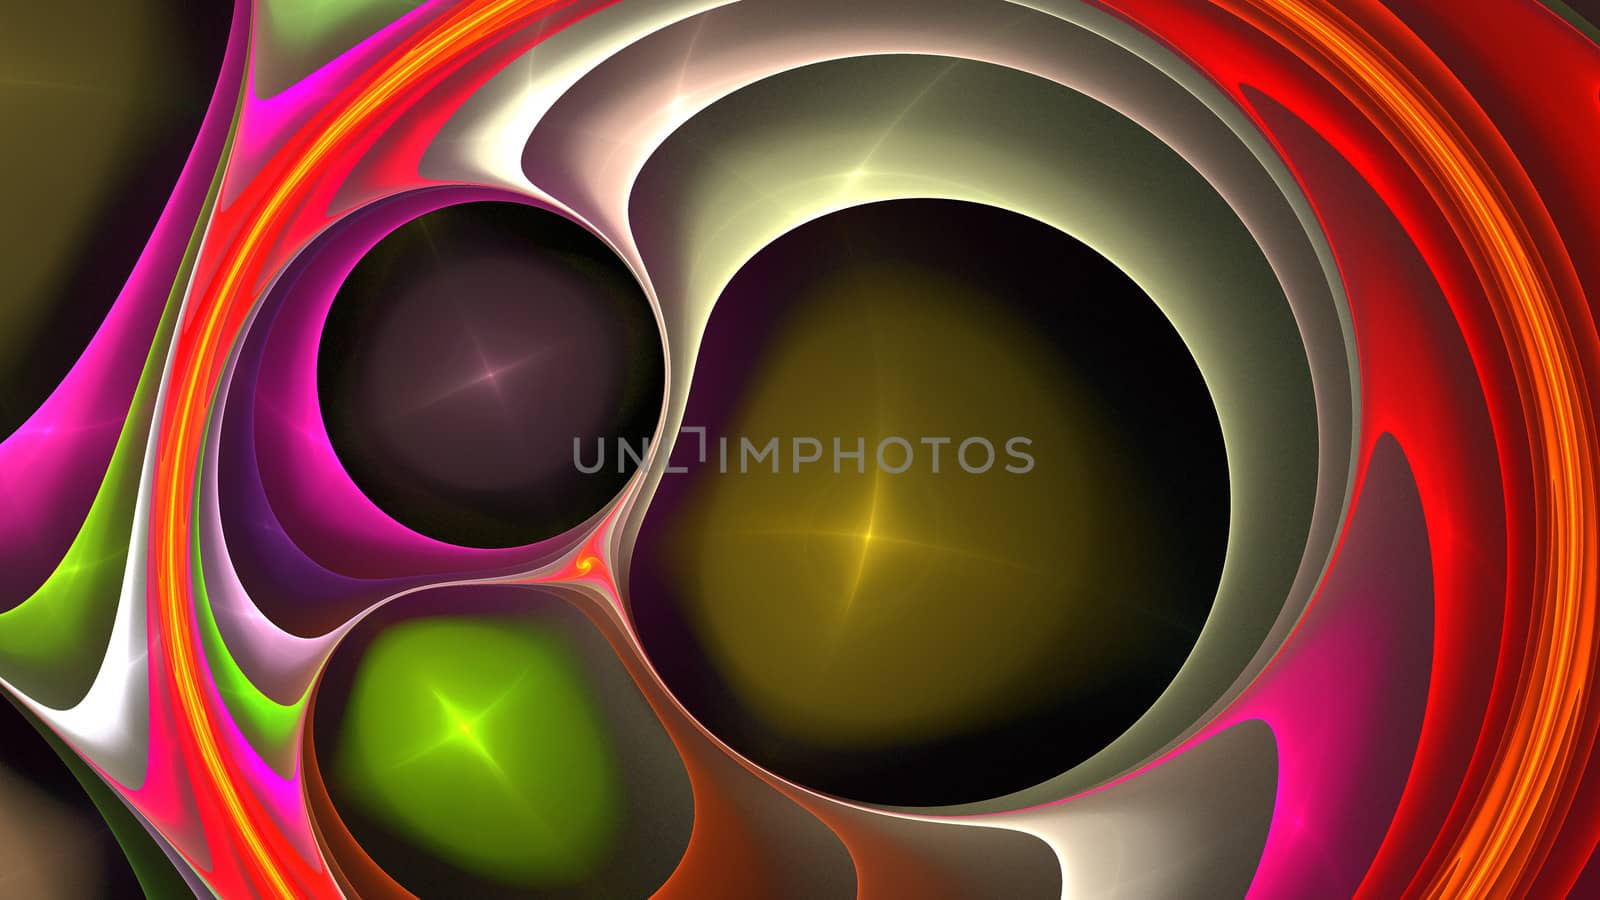 Abstract color background, best viewed many details when viewed at full size